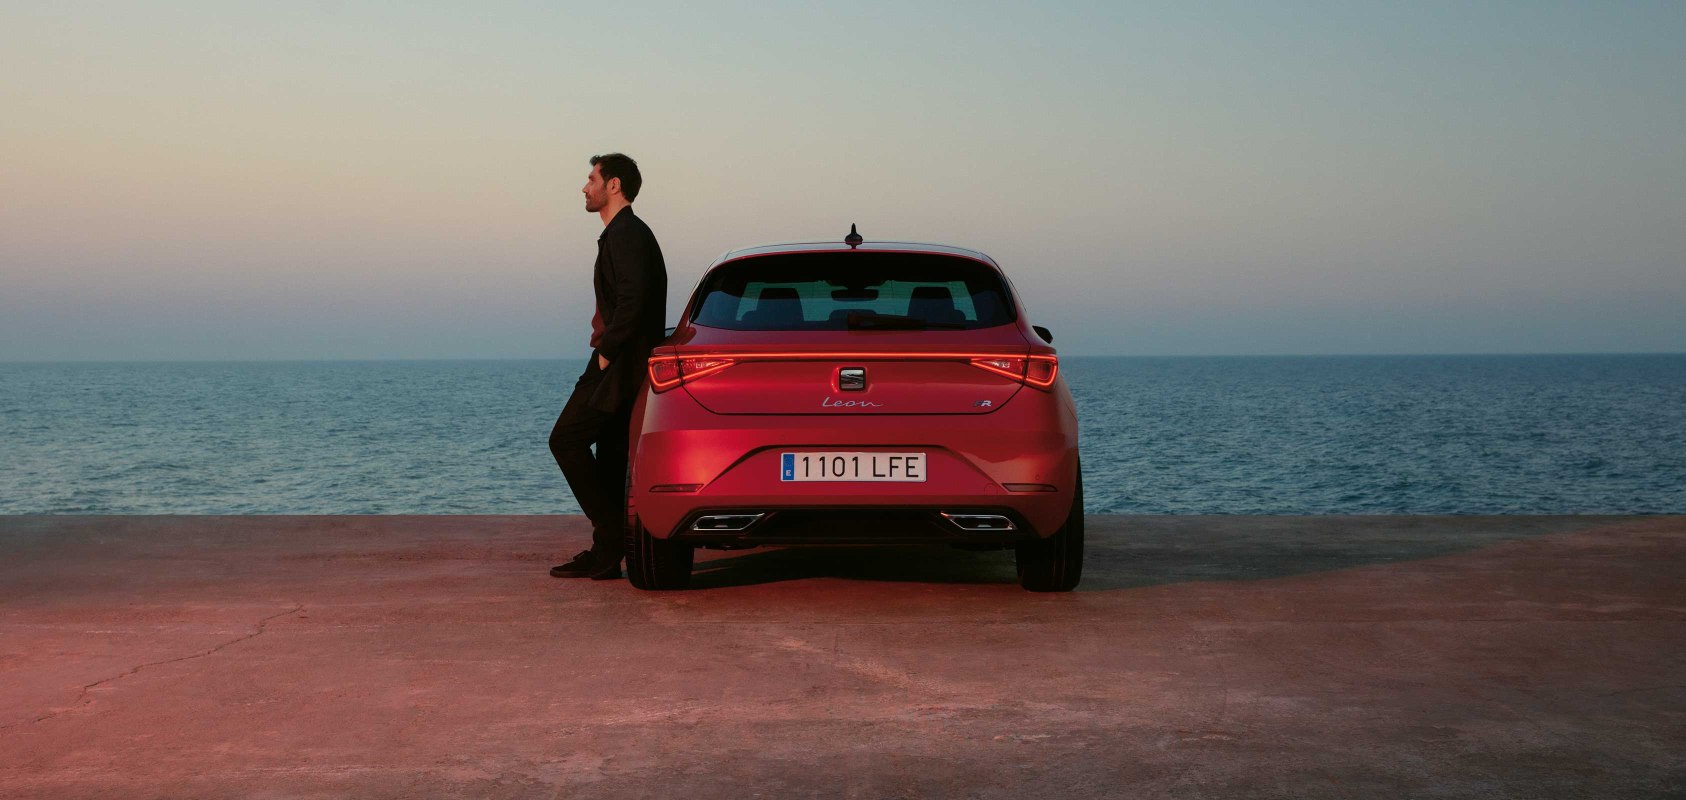 New SEAT Leon desire red colour with the rear to rear coast lights